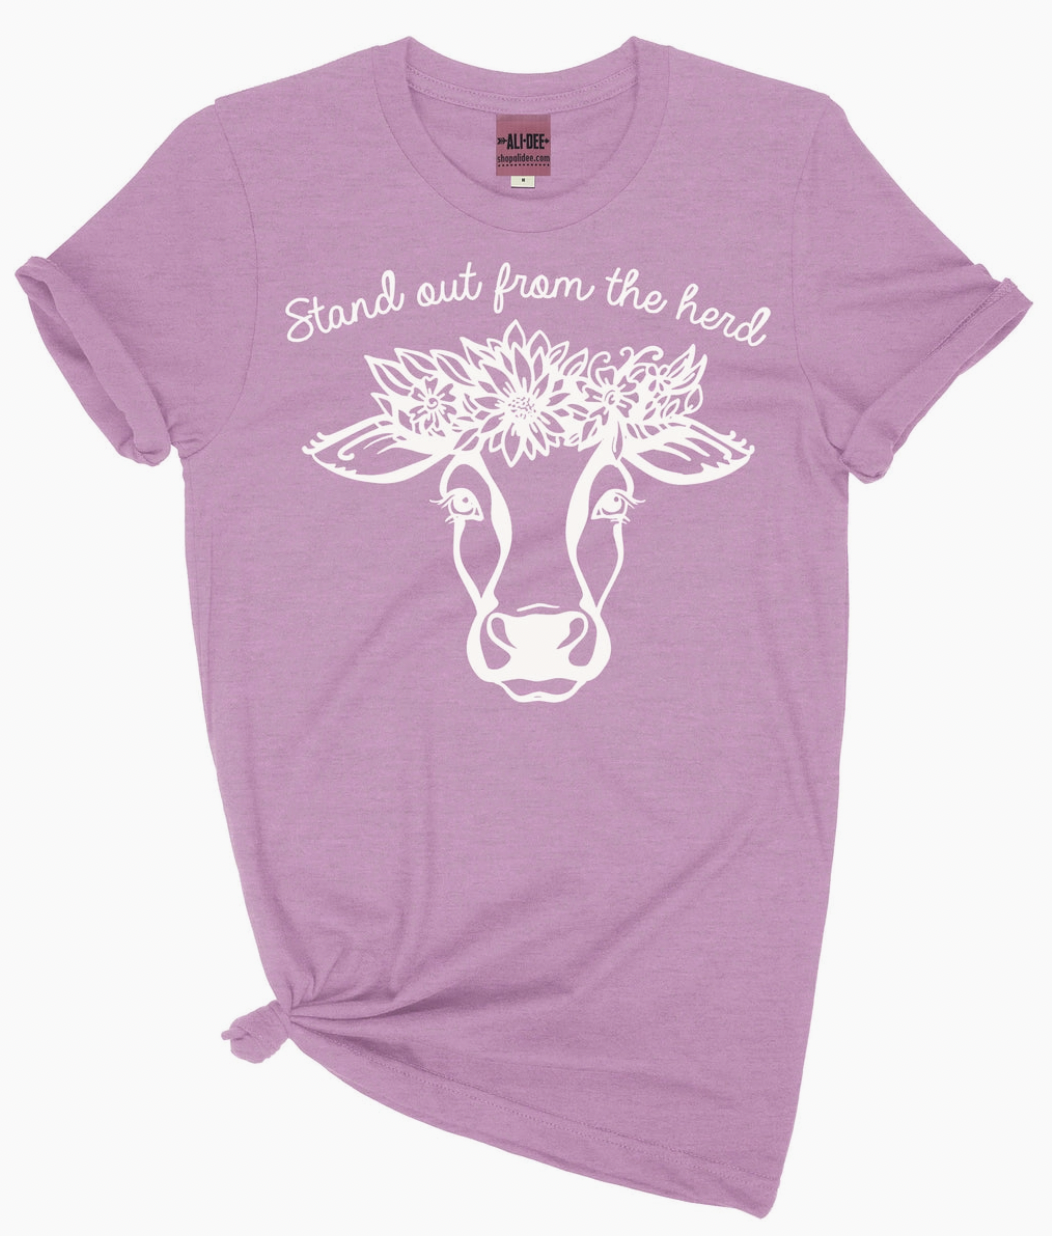 Kids Stand Out from the Herd Tshirt